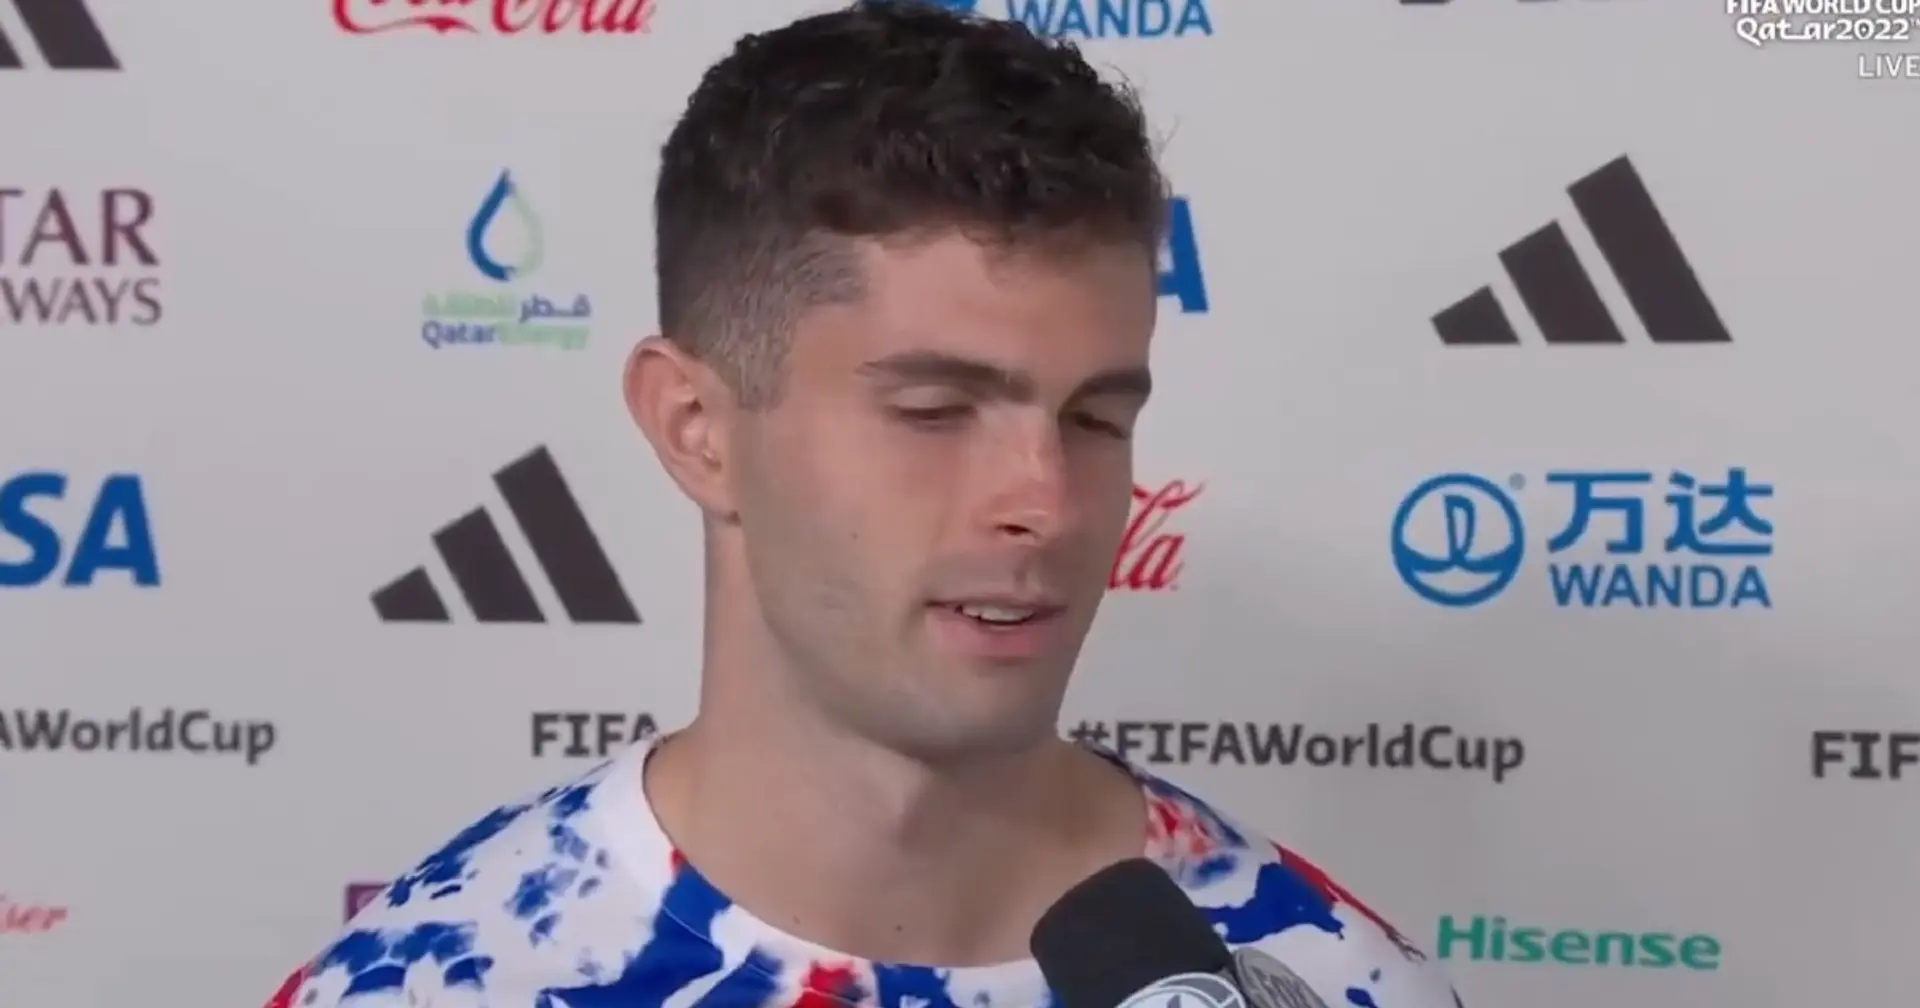 'We deserved more from this tournament': Pulisic reacts to World Cup exit